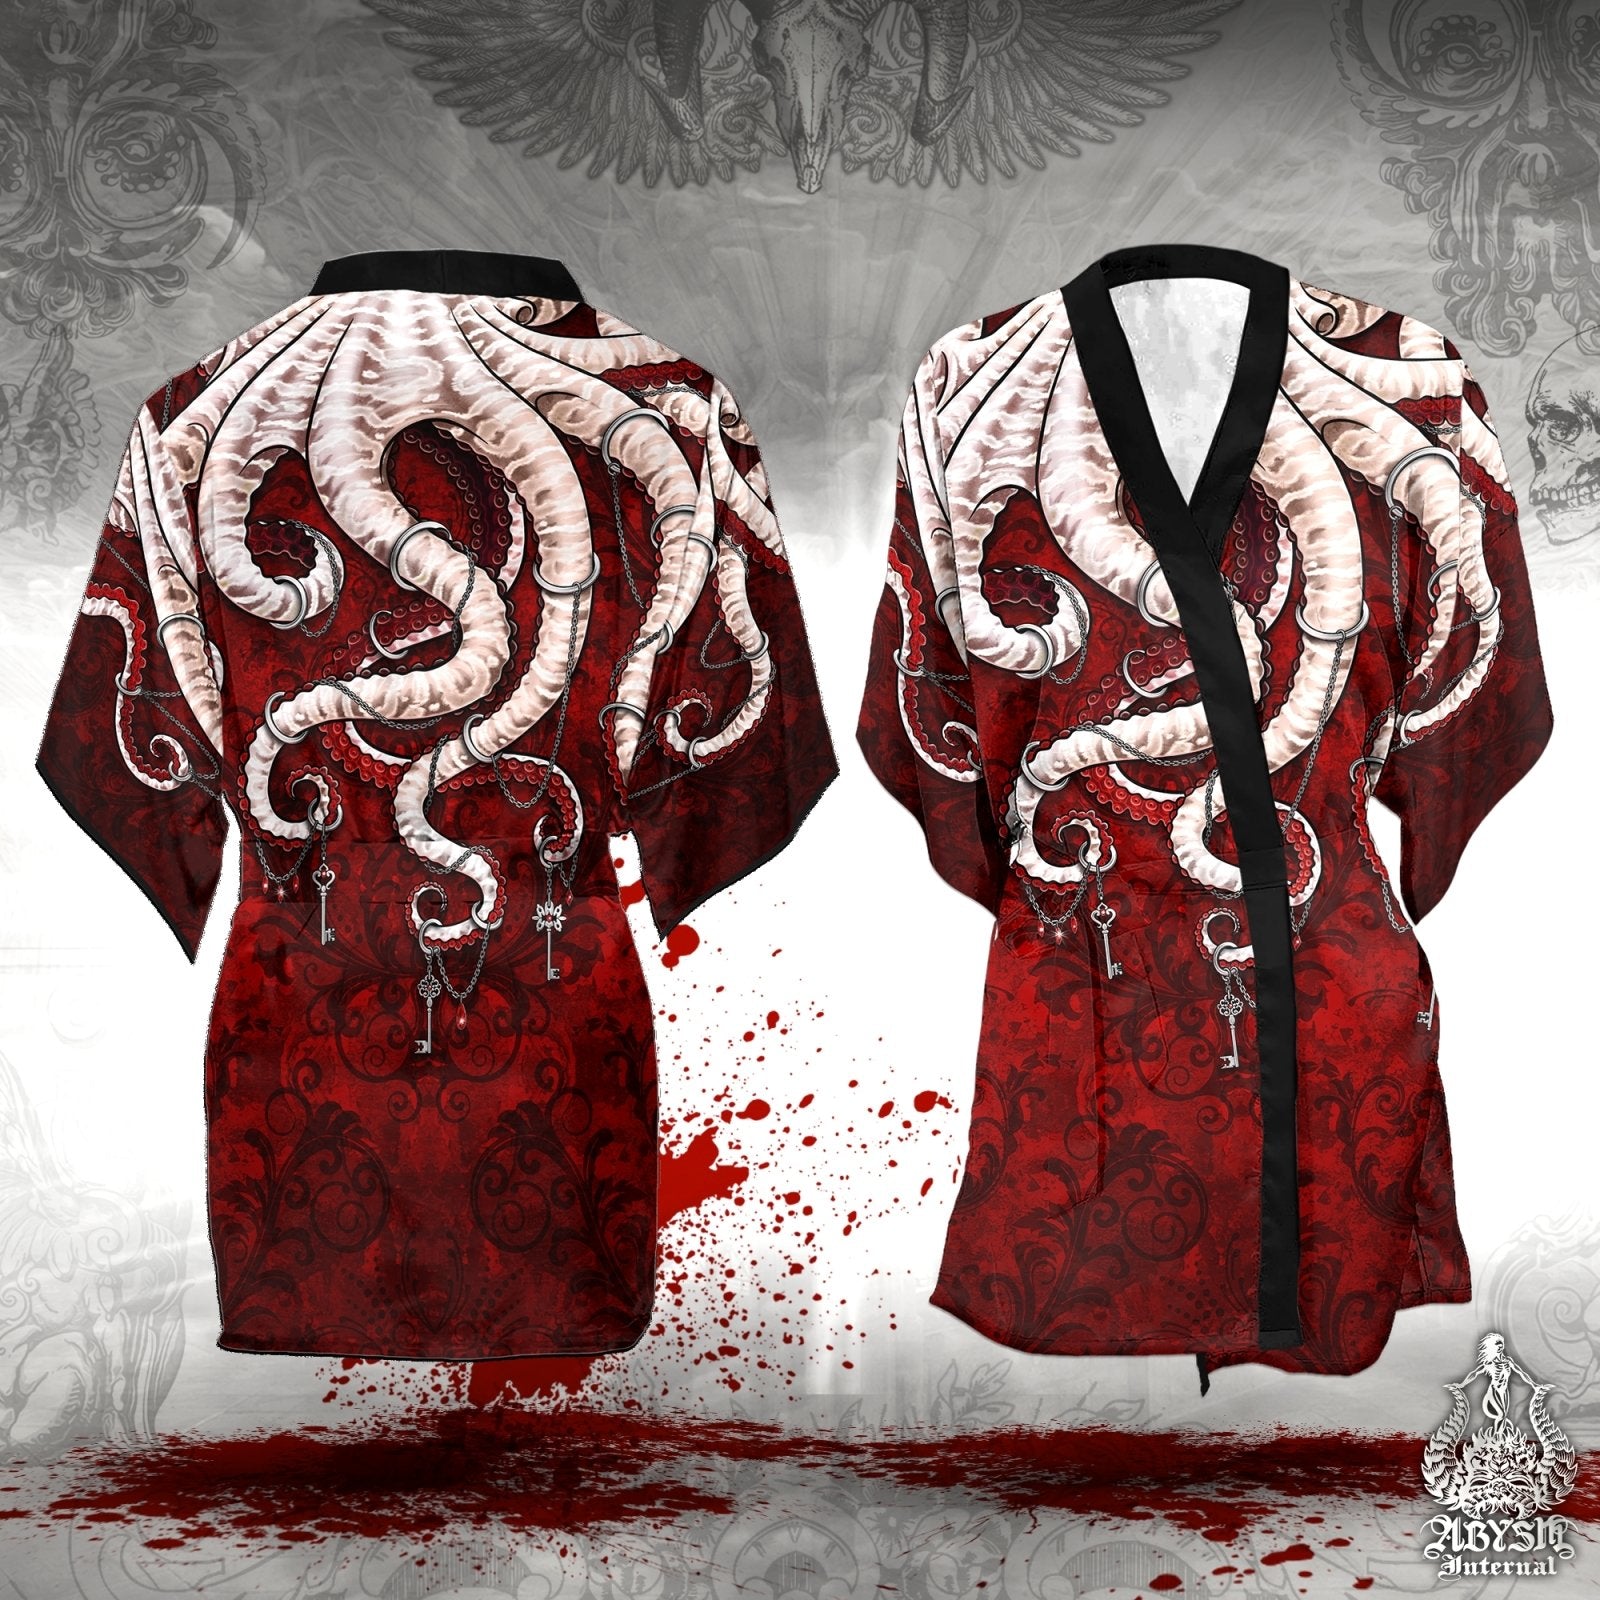 Beach Cover Up, Beach Outfit, Octopus Party Kimono, Summer Festival Robe, Indie and Alternative Clothing, Unisex - Bloody White Goth I - Abysm Internal